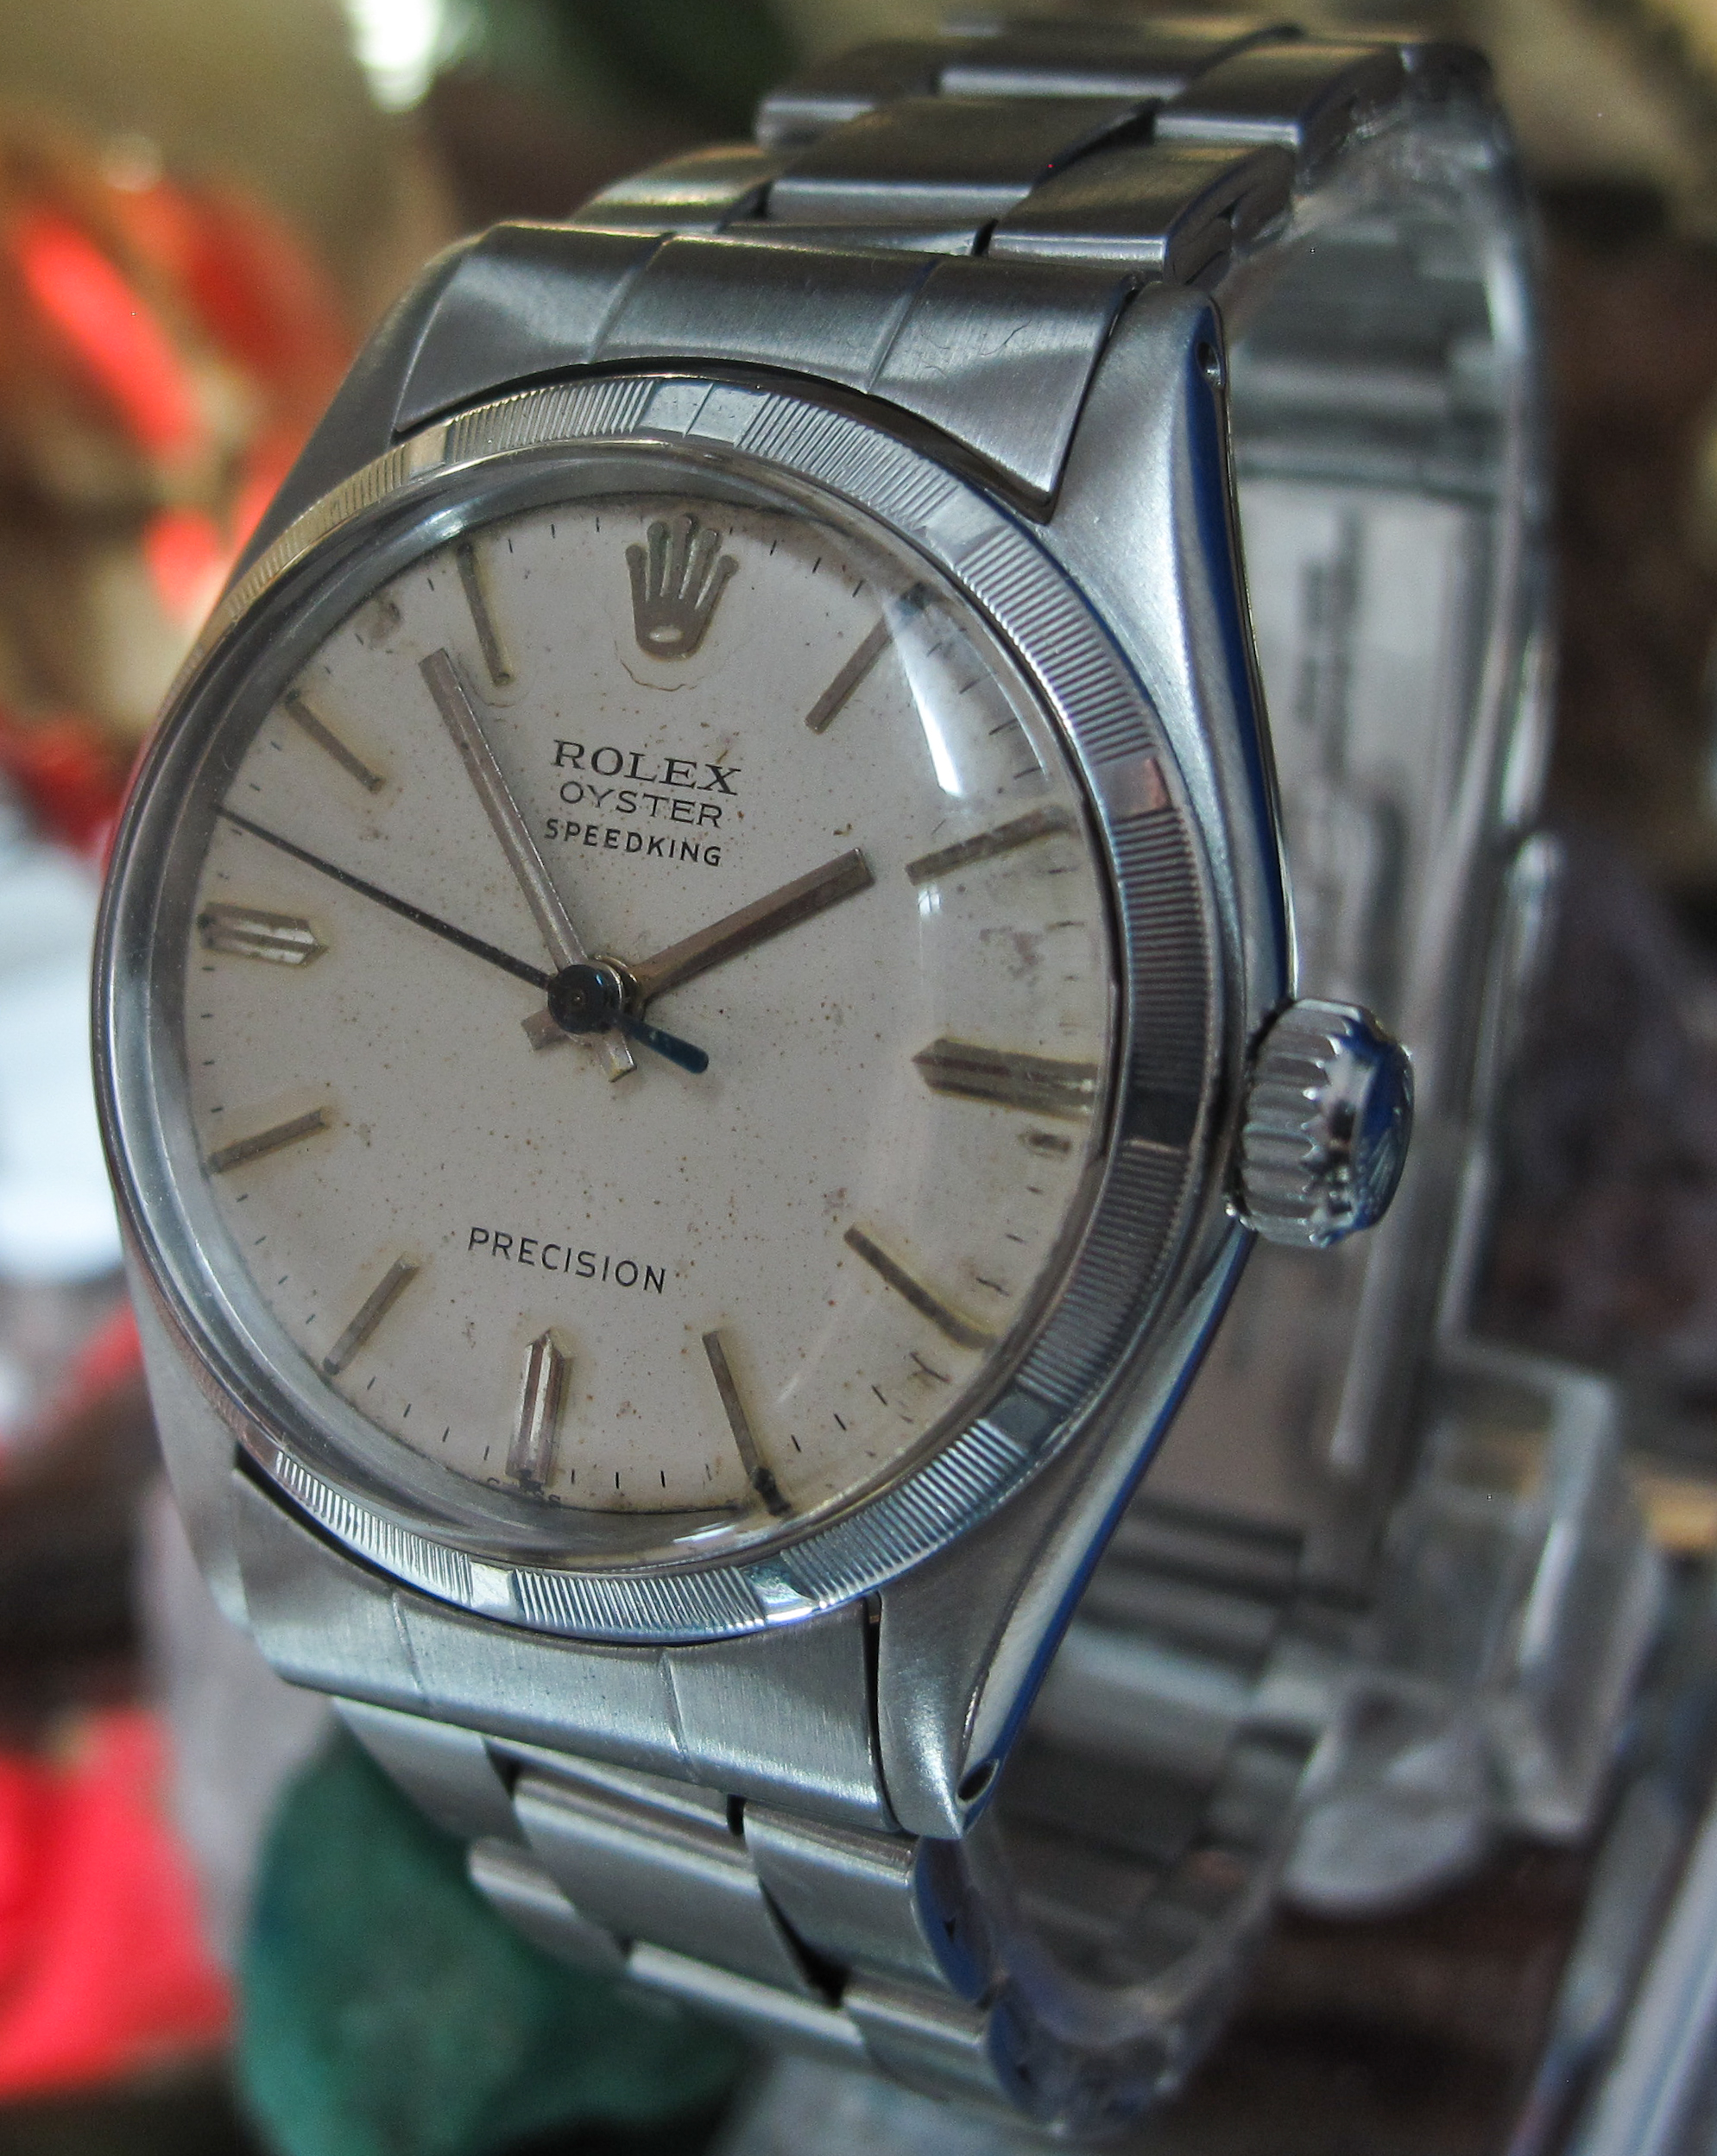 Rolex Oyster Speed King Precision Circa 